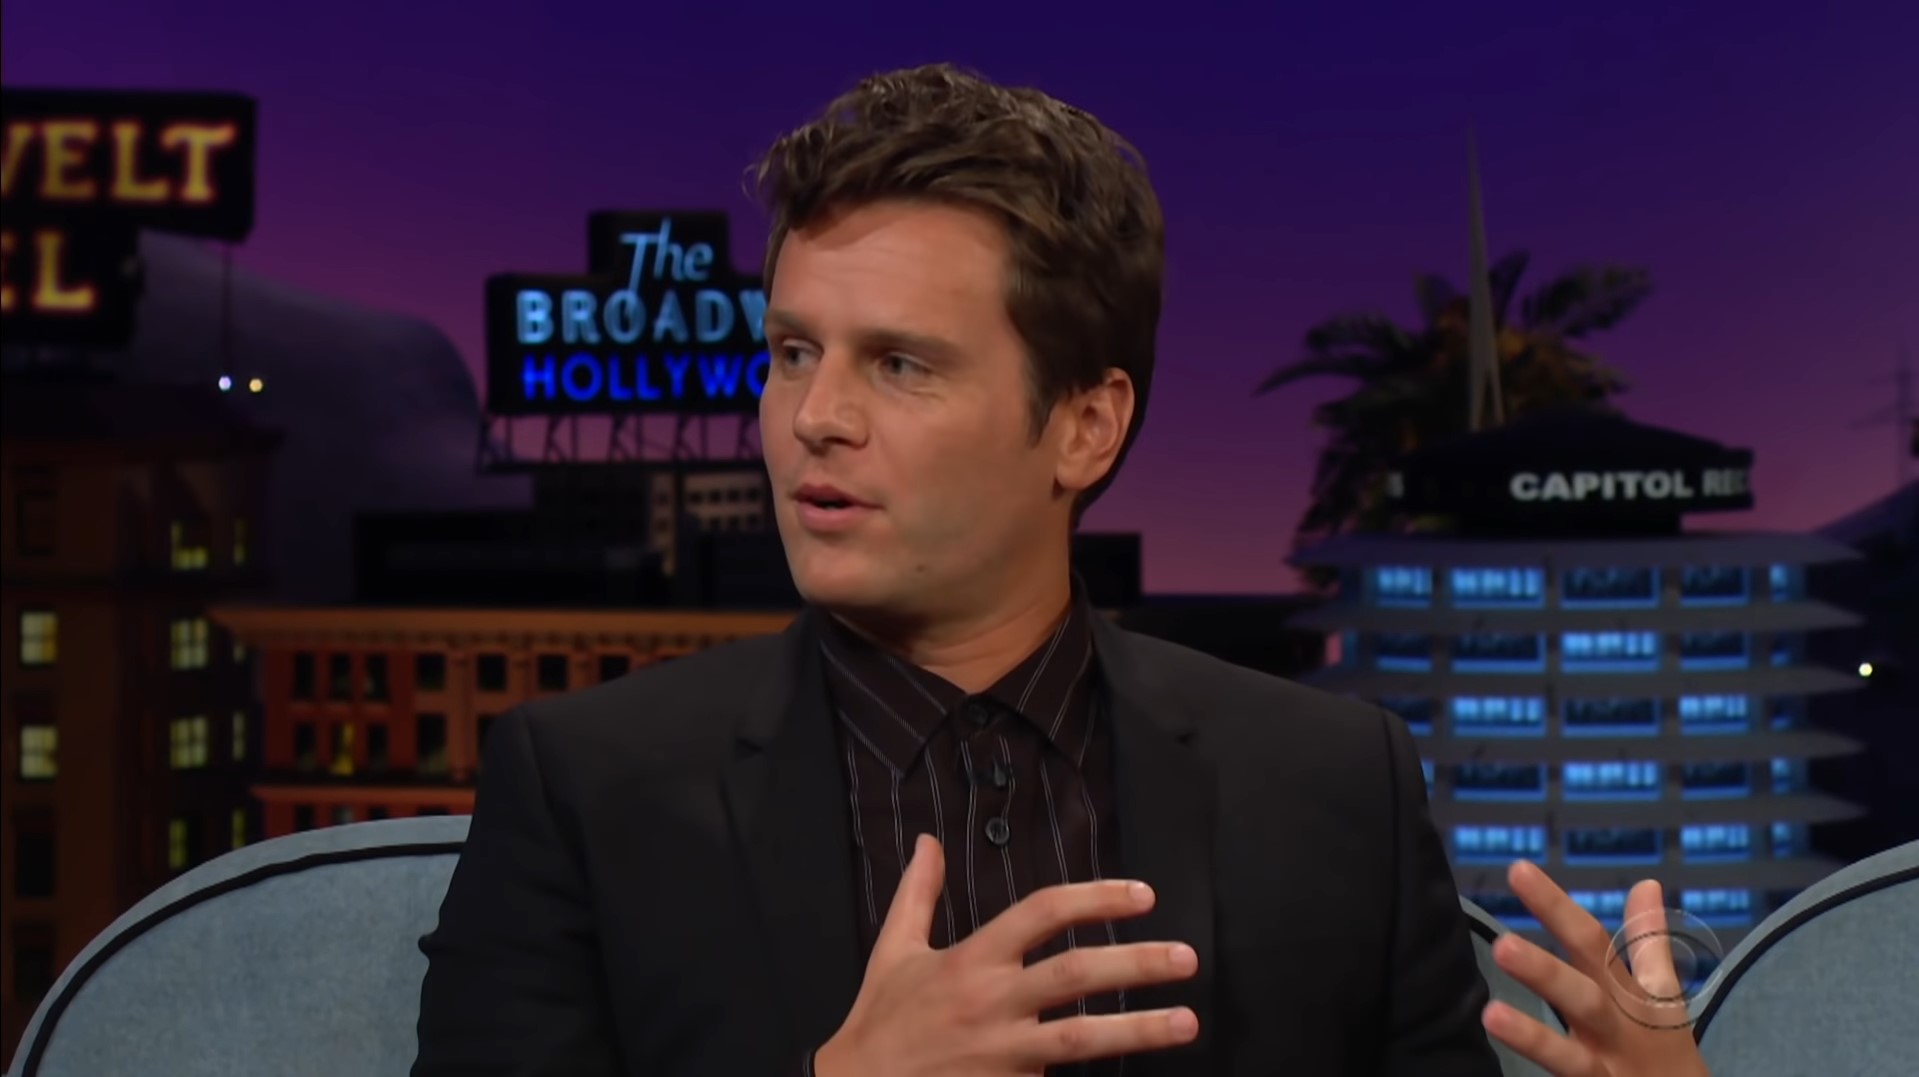 Is Jonathan Groff Married? Does He Have a Boyfriend?